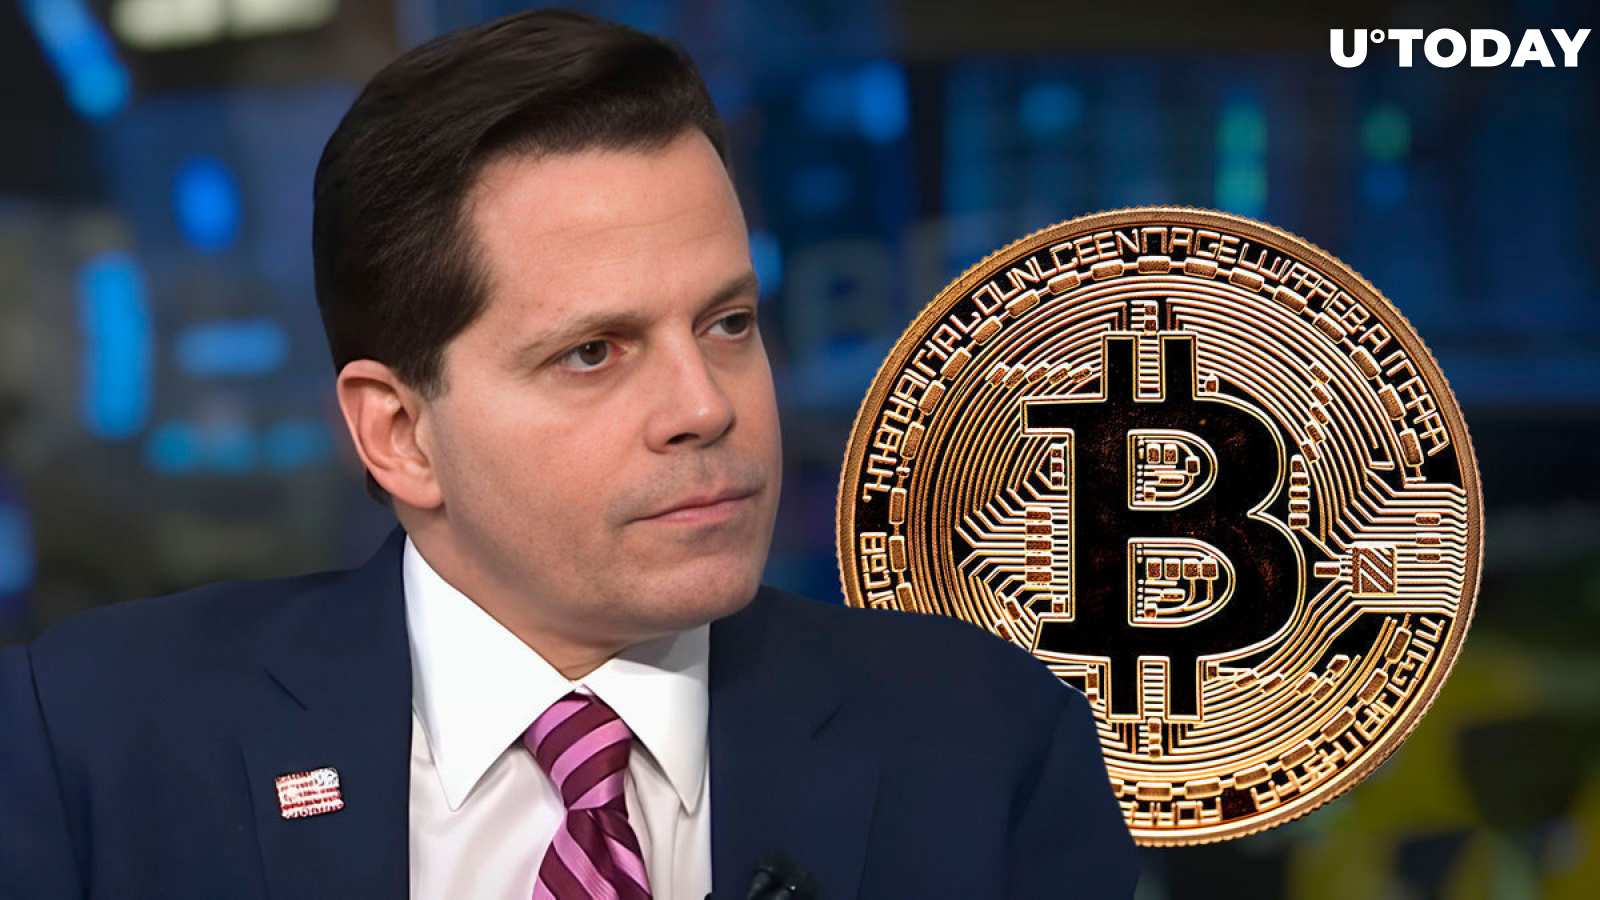 Bullish Bitcoin Statement Made by Anthony Scaramucci After This New Development